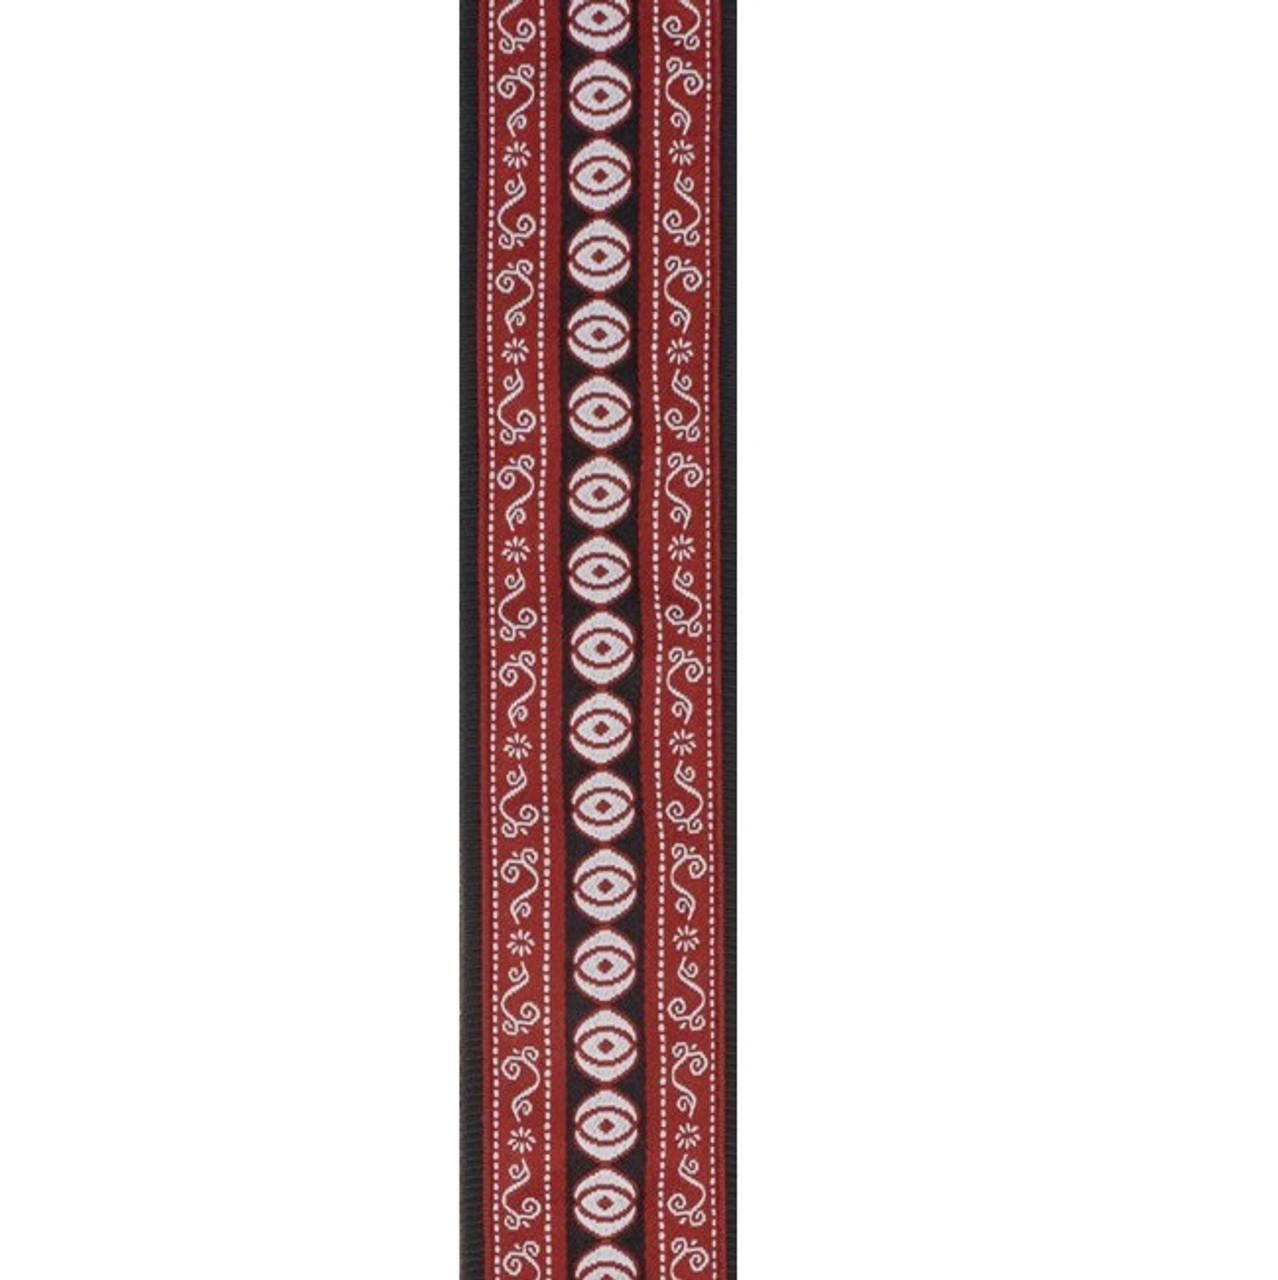 Planet Waves Woven Guitar Strap, Henna